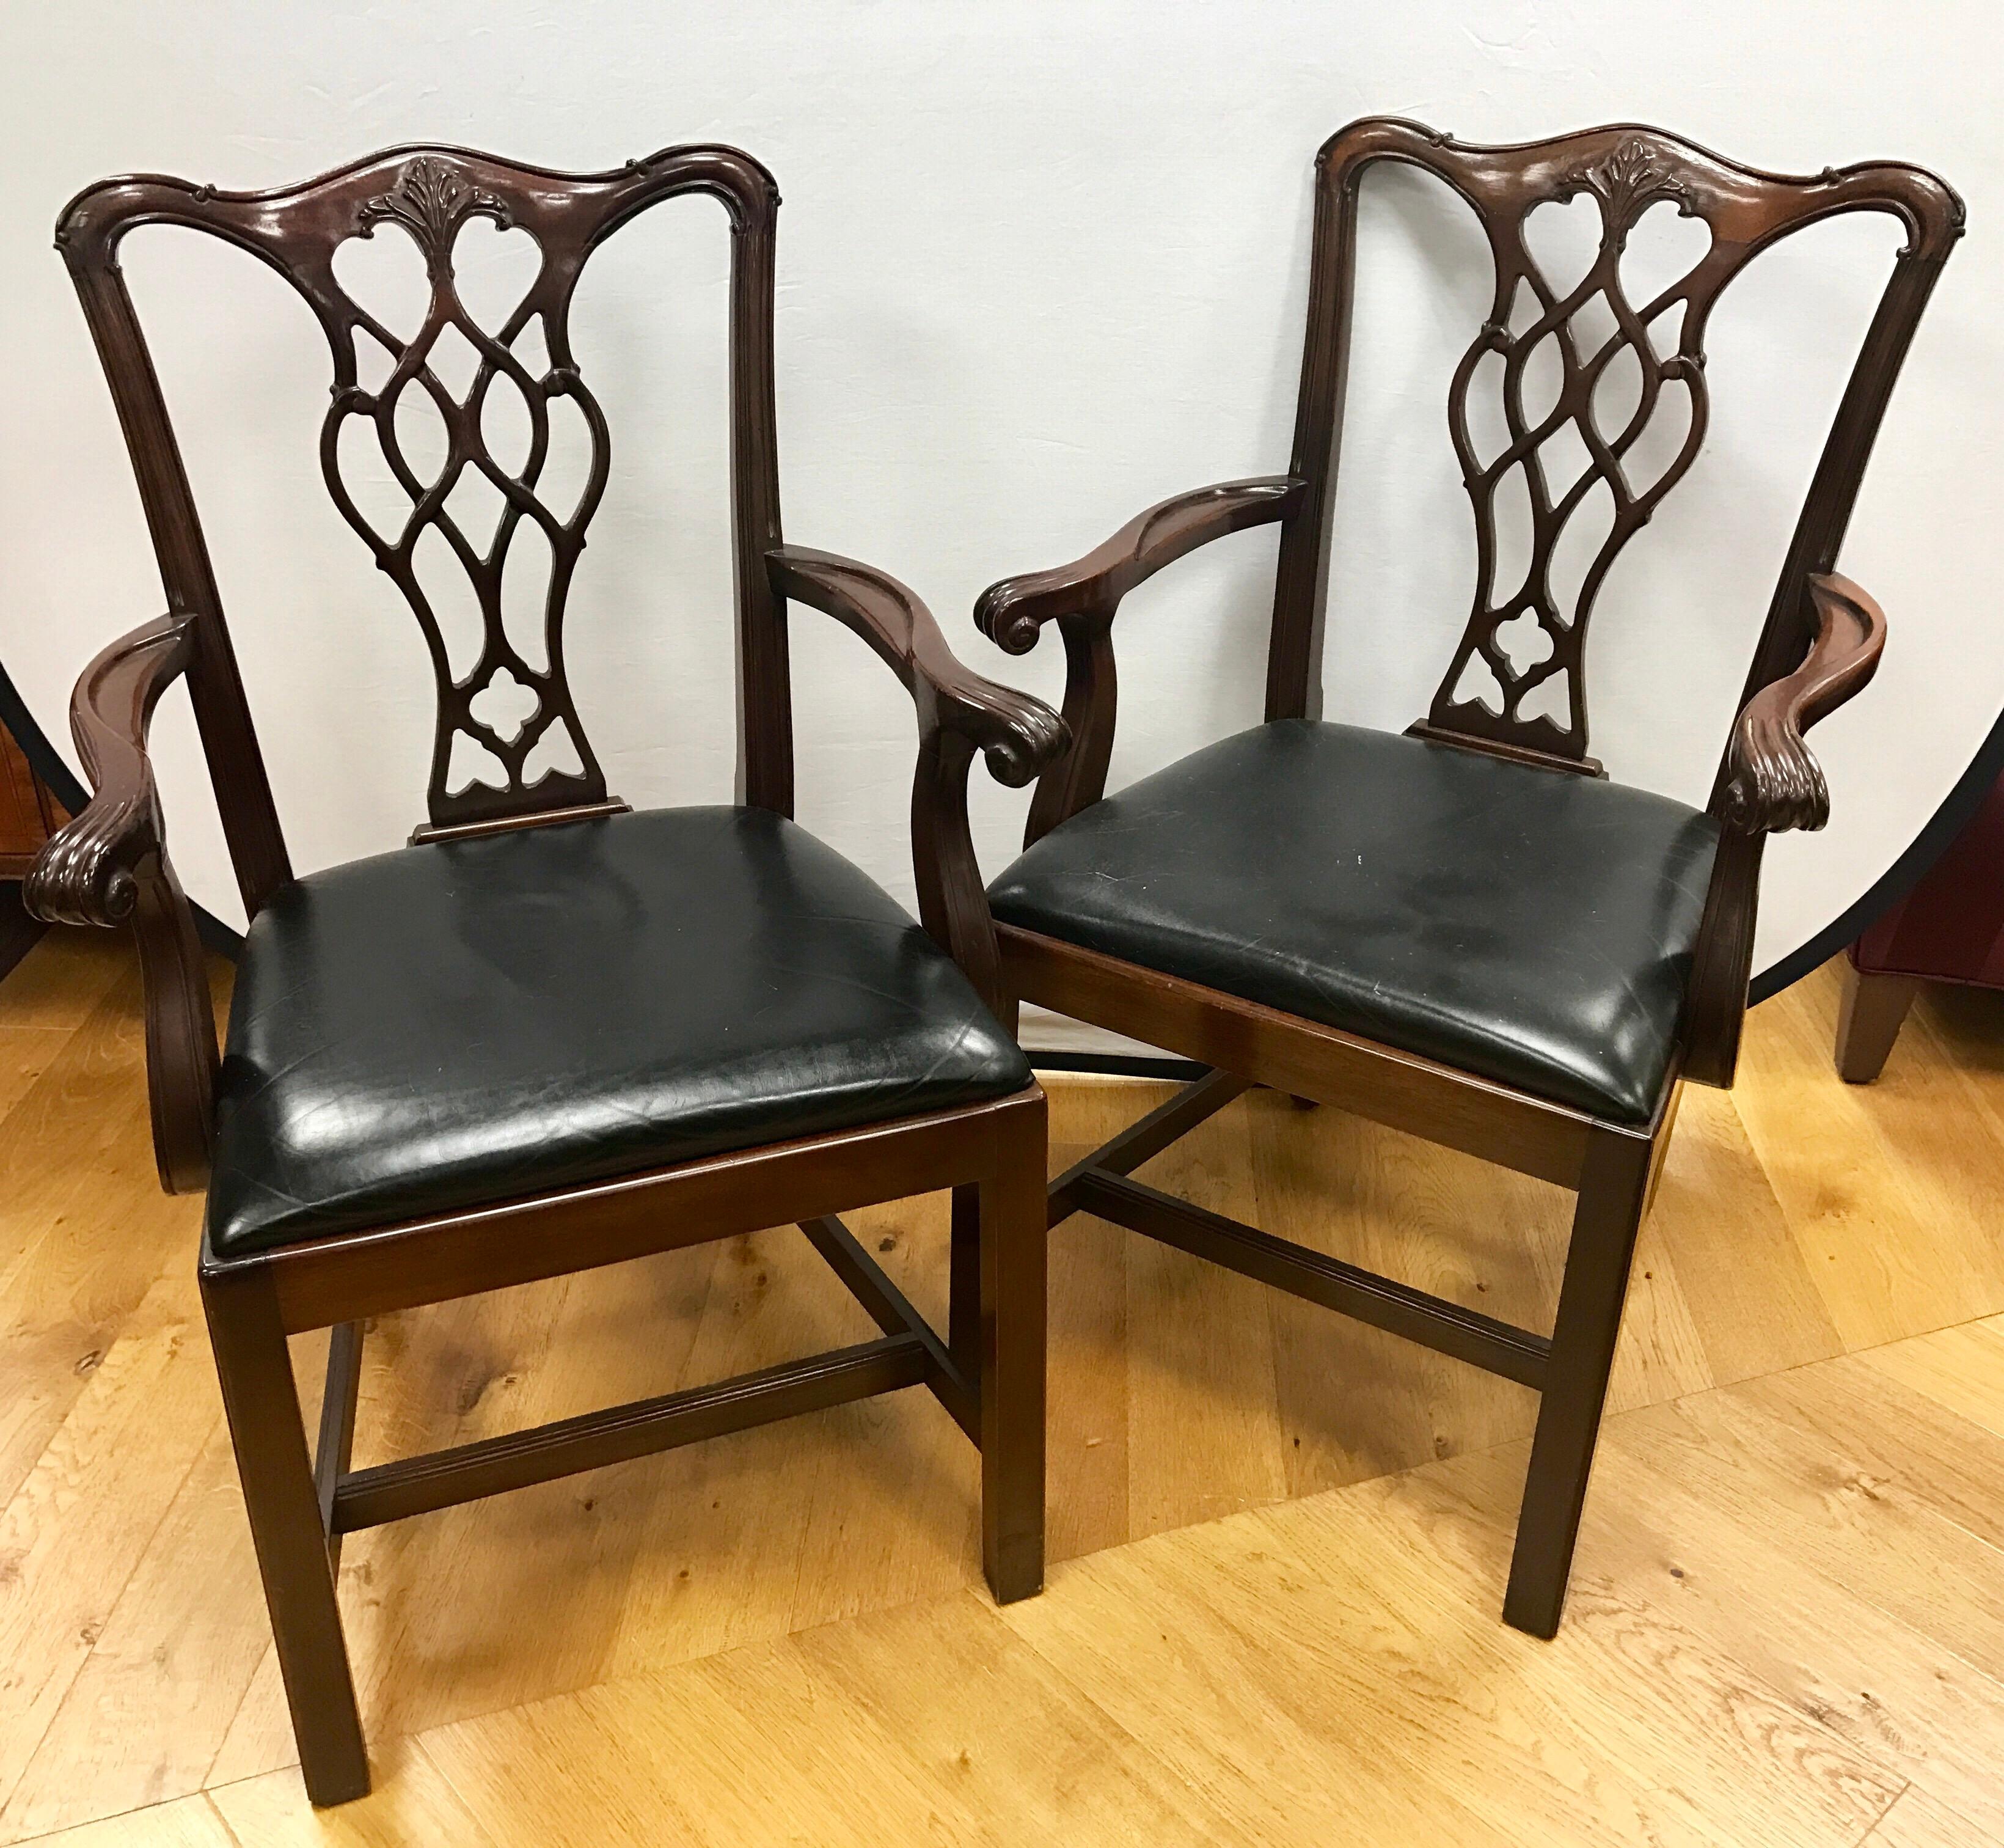 Elegant pair of matching Chippendale vintage mahogany armchairs with black vinyl seat cushions.
We have several sets of these.